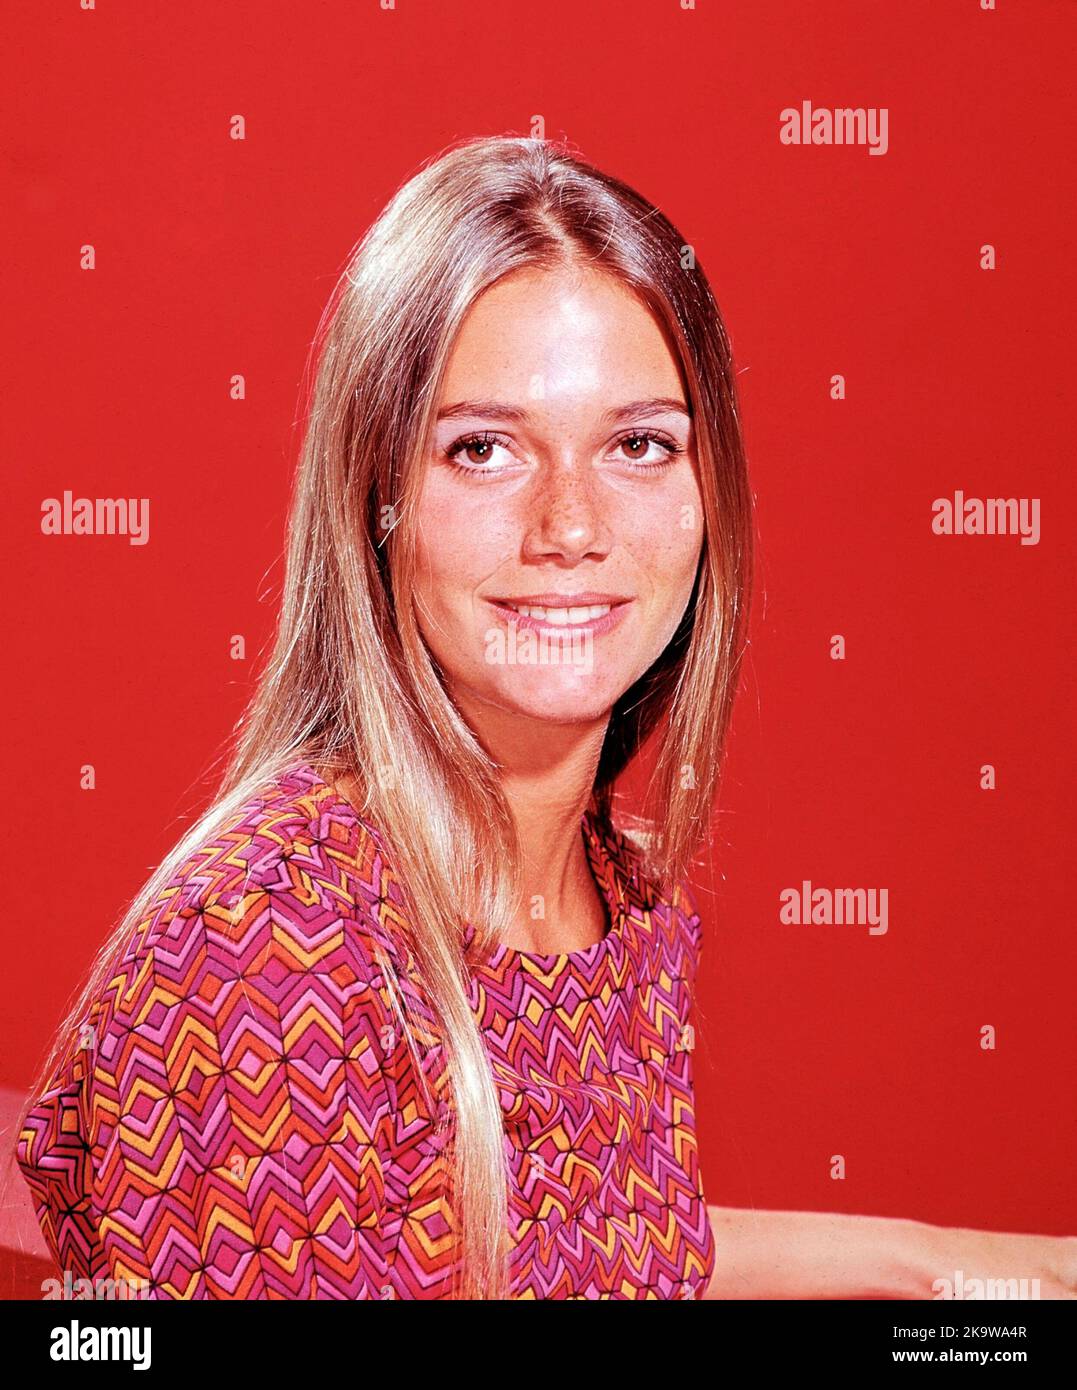 PEGGY LIPTON in THE MOD SQUAD (1968), directed by JERRY JAMESON, GENE NELSON, EARL BELLAMY, GEORGE MCCOWAN and BUDDY RUSKIN. Credit: Thomas-Spelling Productions / Album Stock Photo